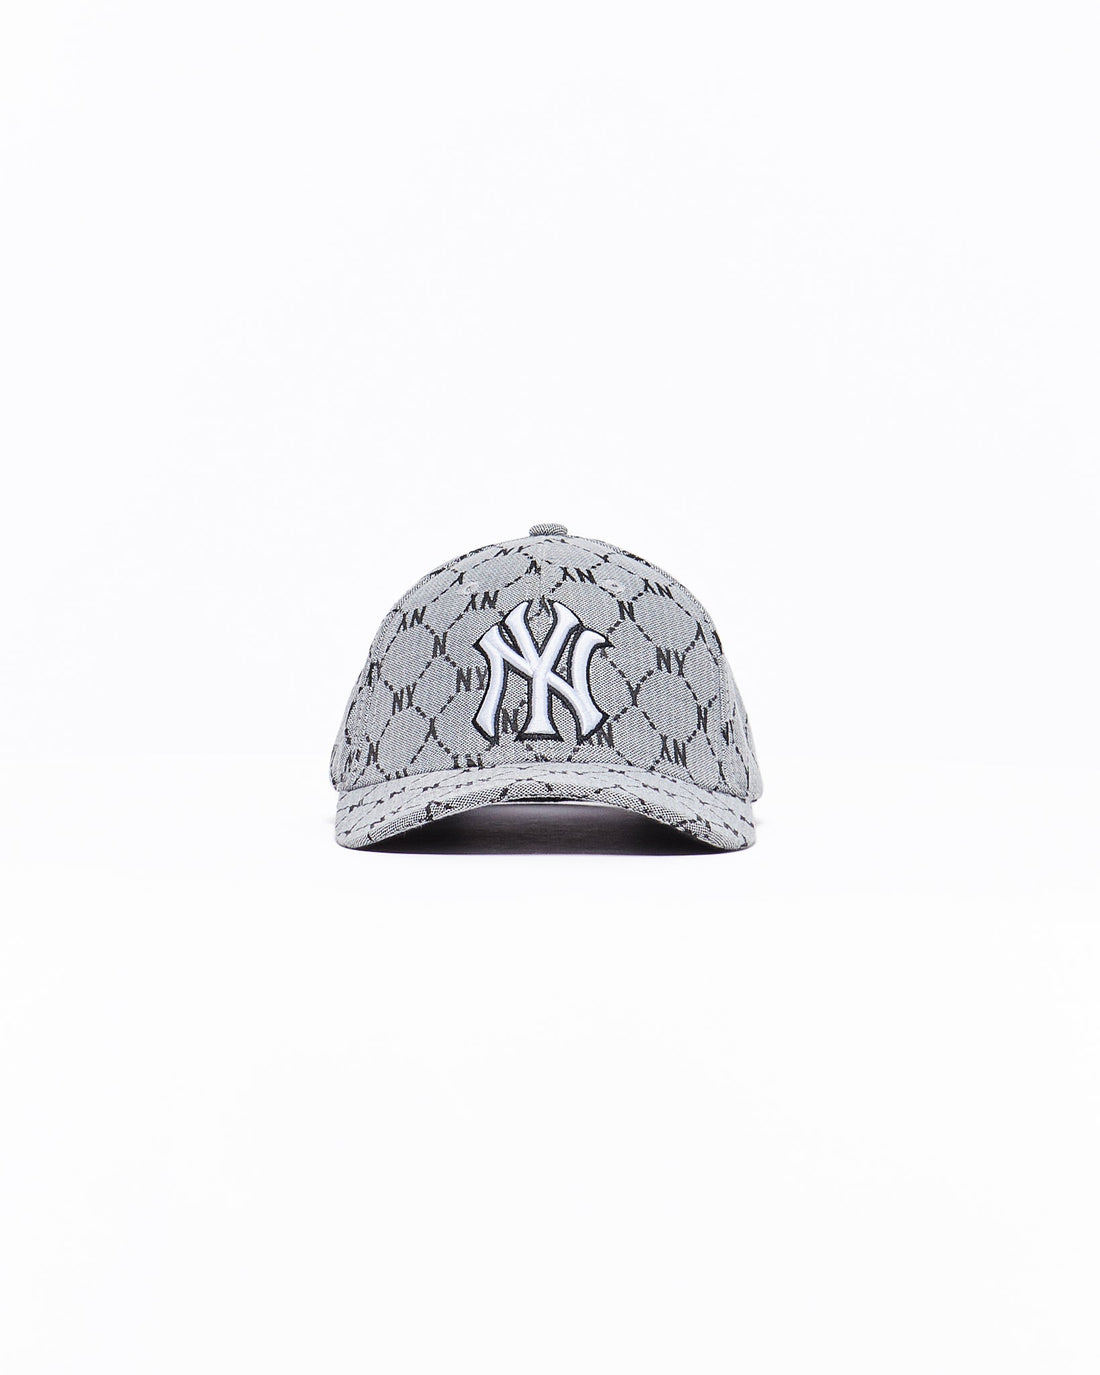 MOI OUTFIT-NY Logo Embroidered Hat 12.50